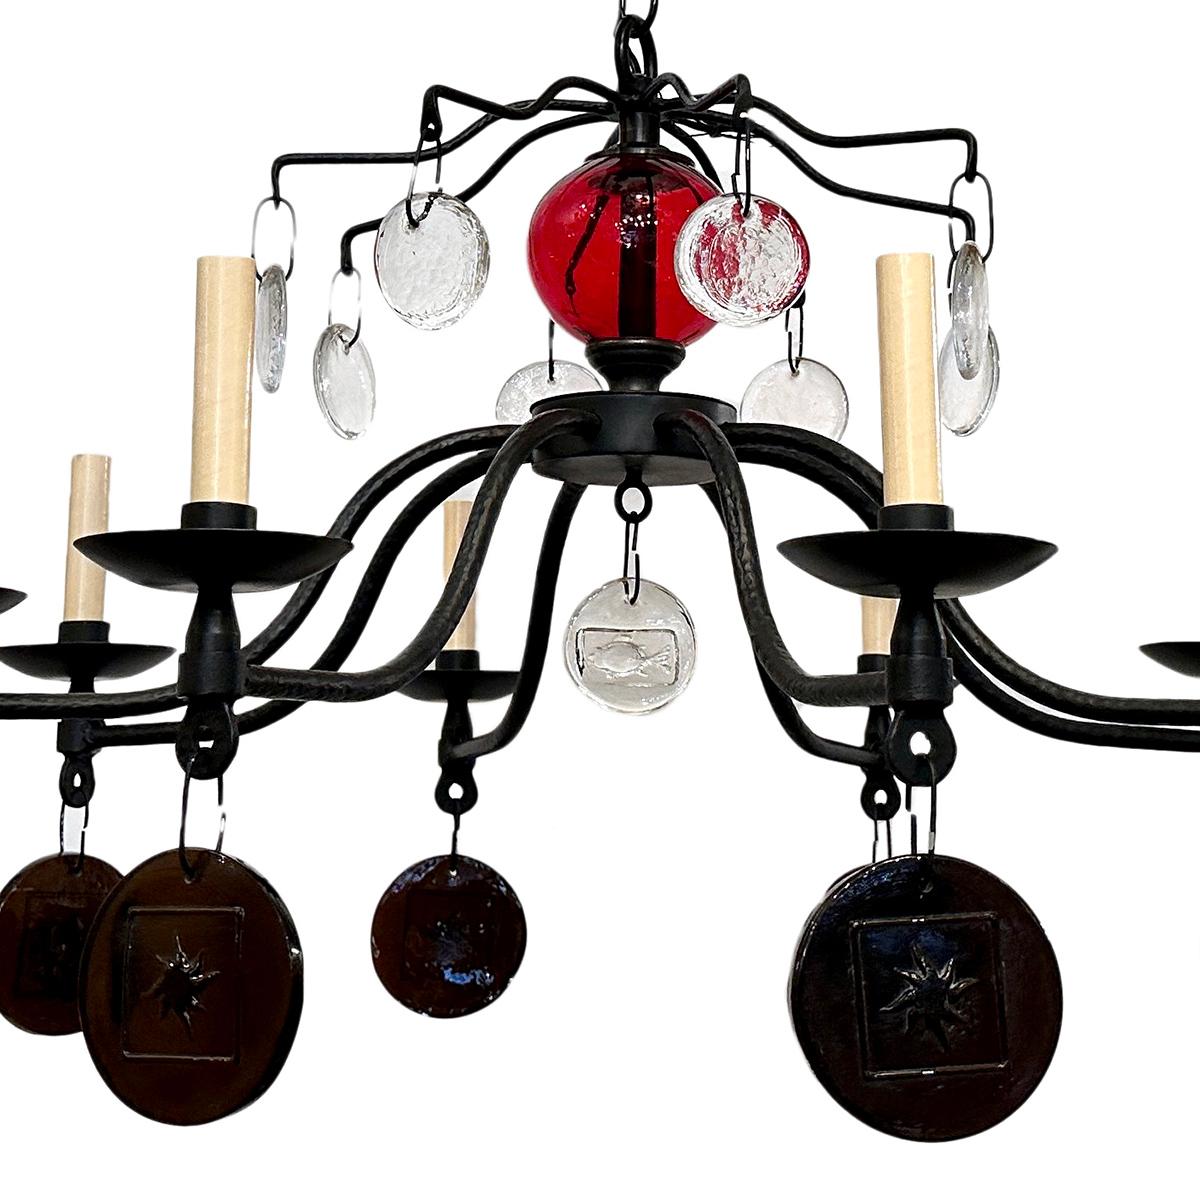 A circa 1970 wrought iron chandelier with 8 lights. Glass insets and pendants.

Measurements:
Drop: 32